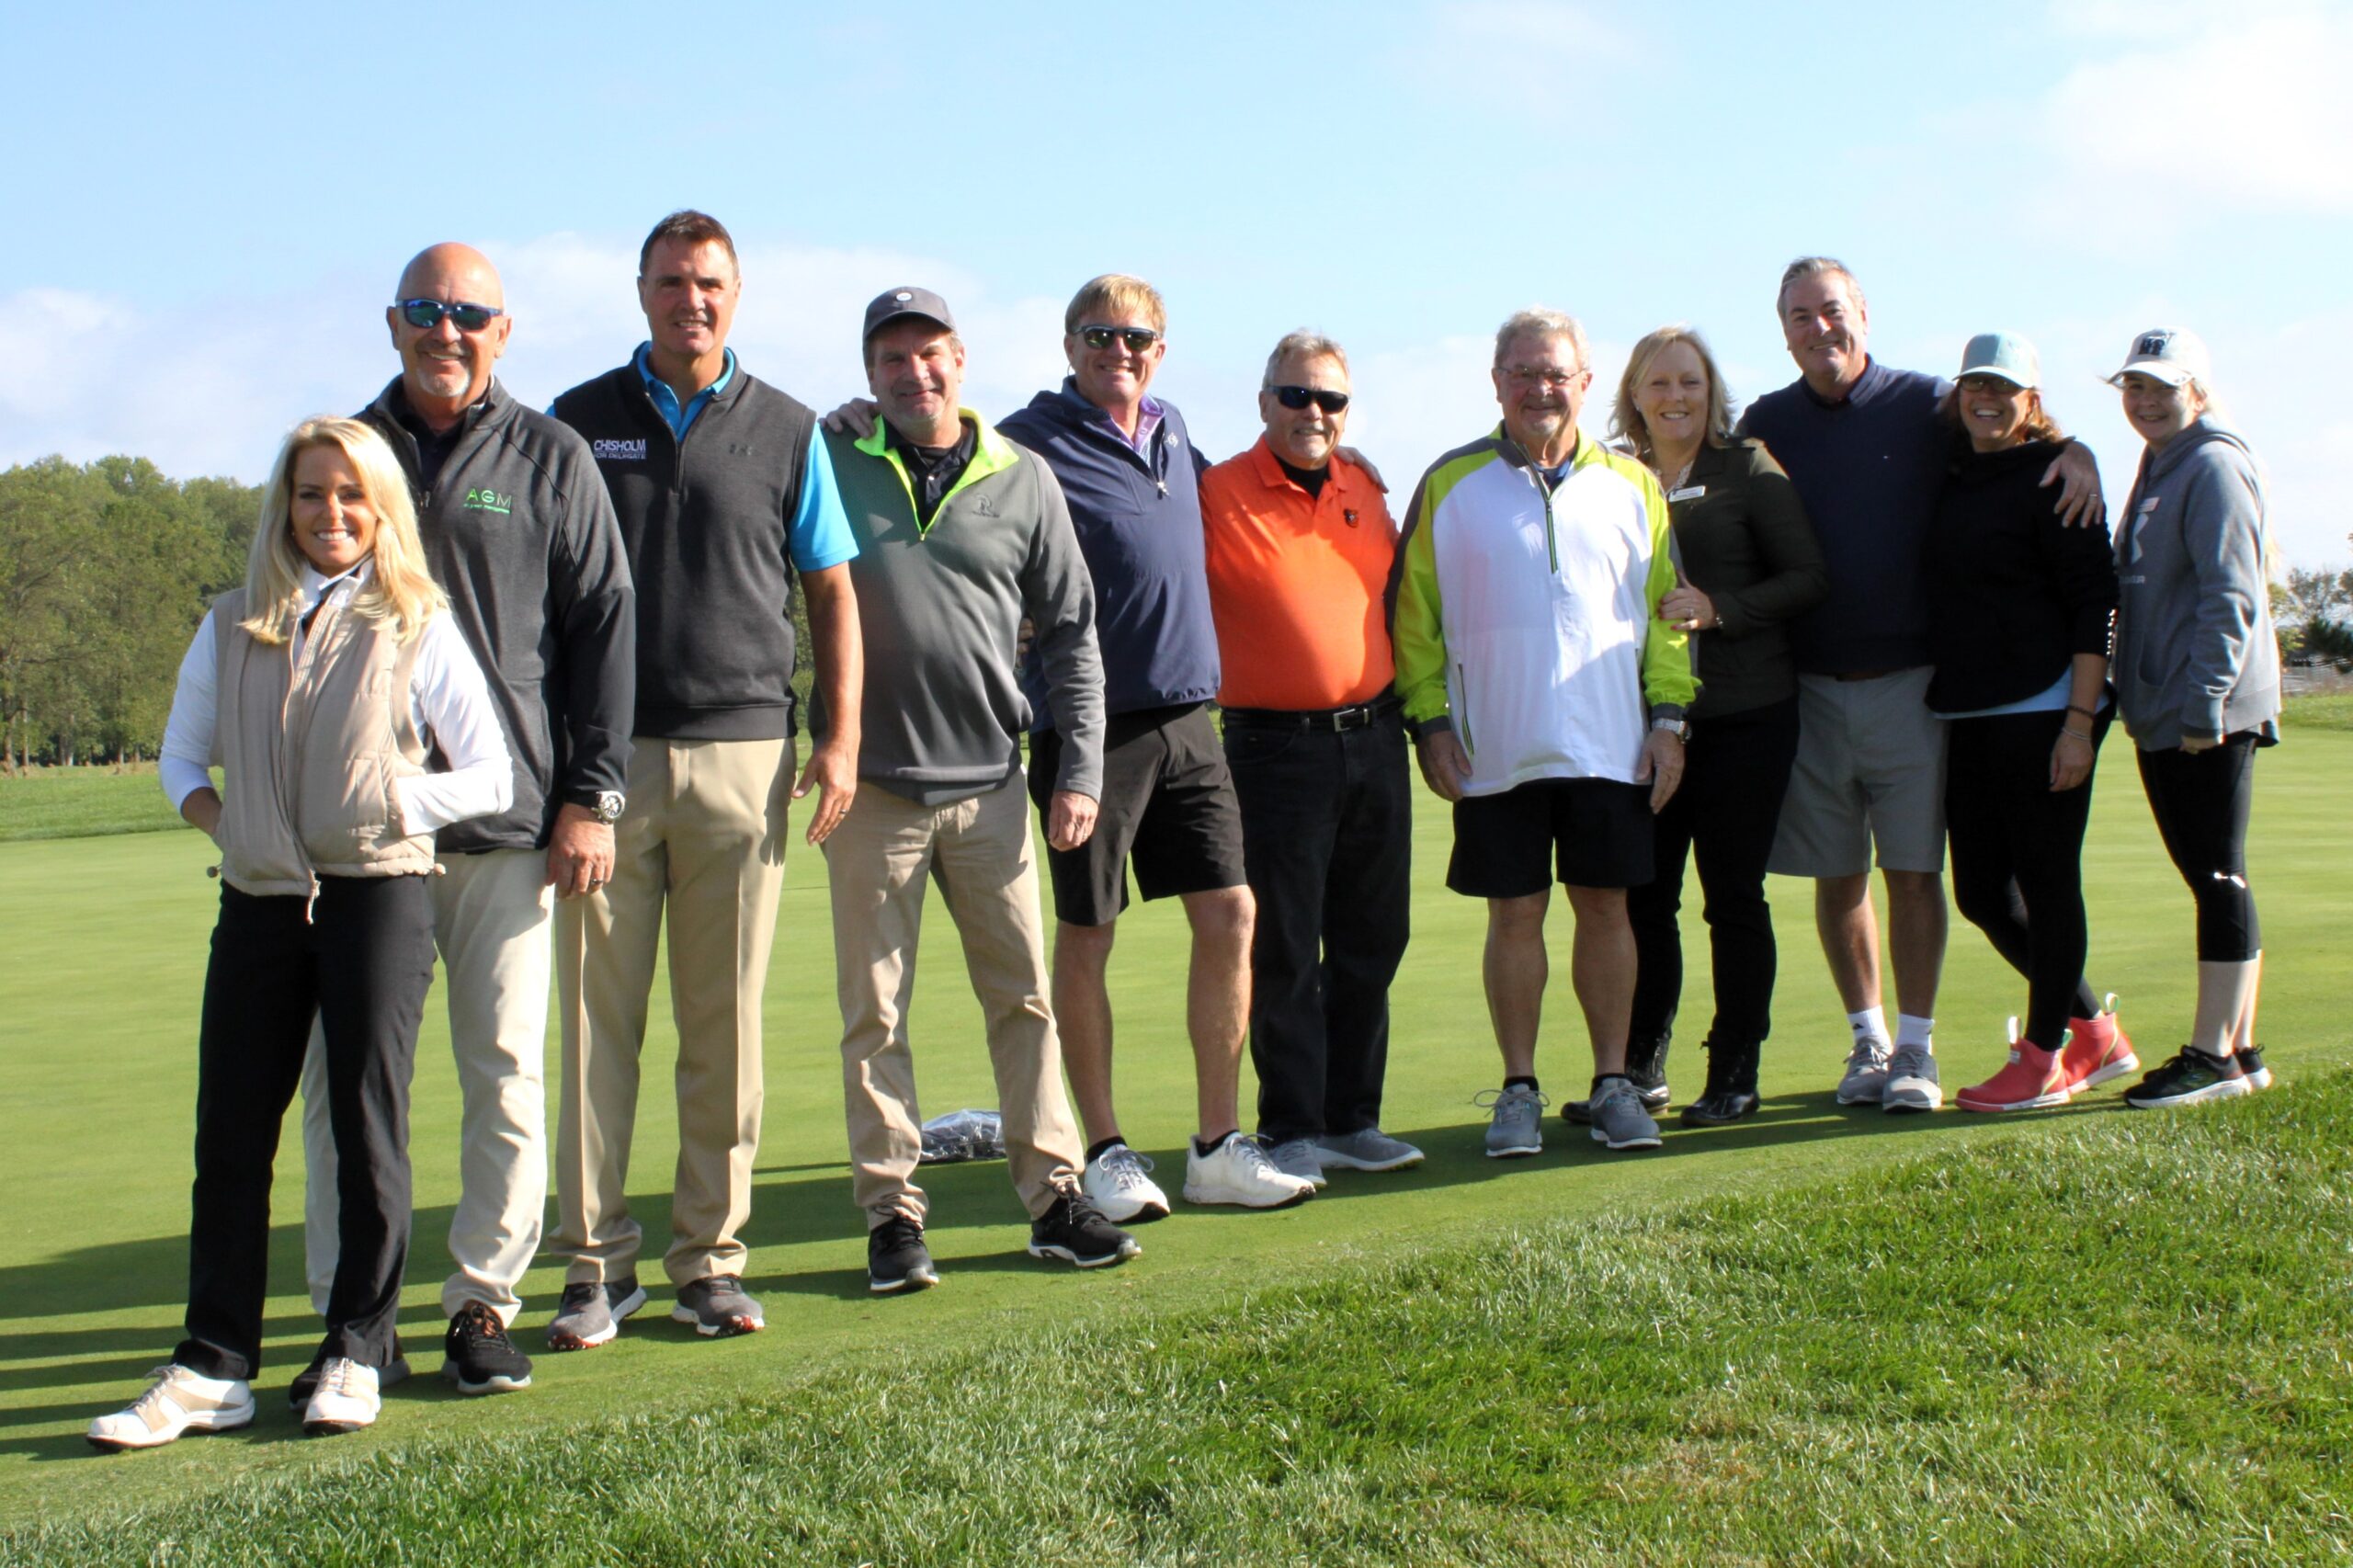 Photos from the Hospice of the Chesapeake 20th annual Golf Tournament charity fundraiser